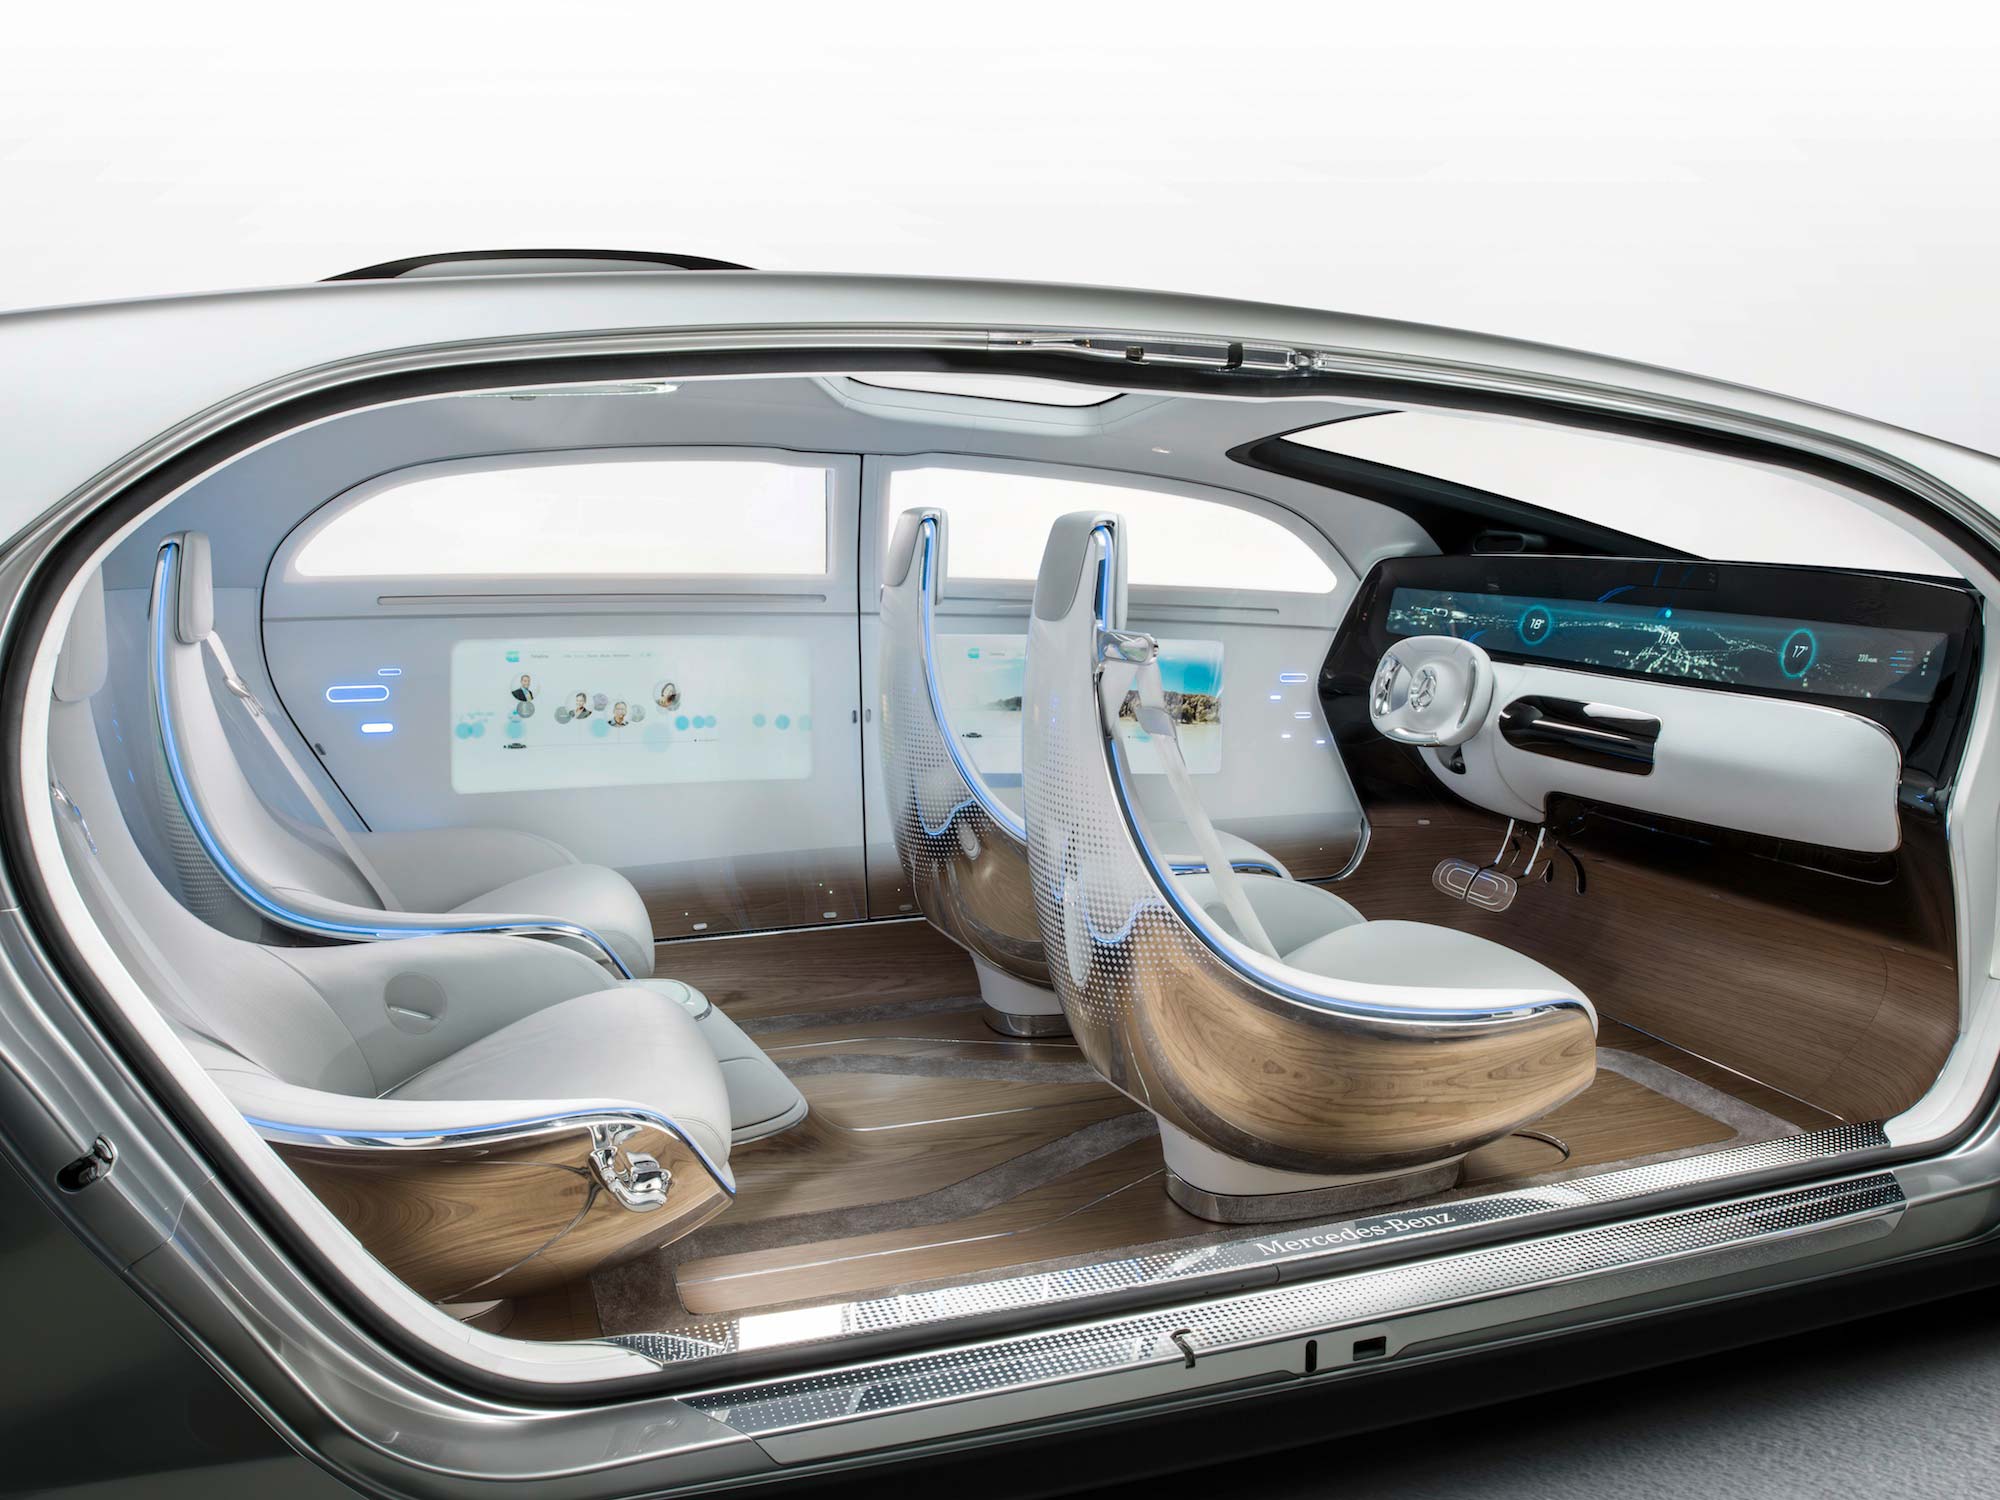 7 Predictions for Smarter Connected Cars